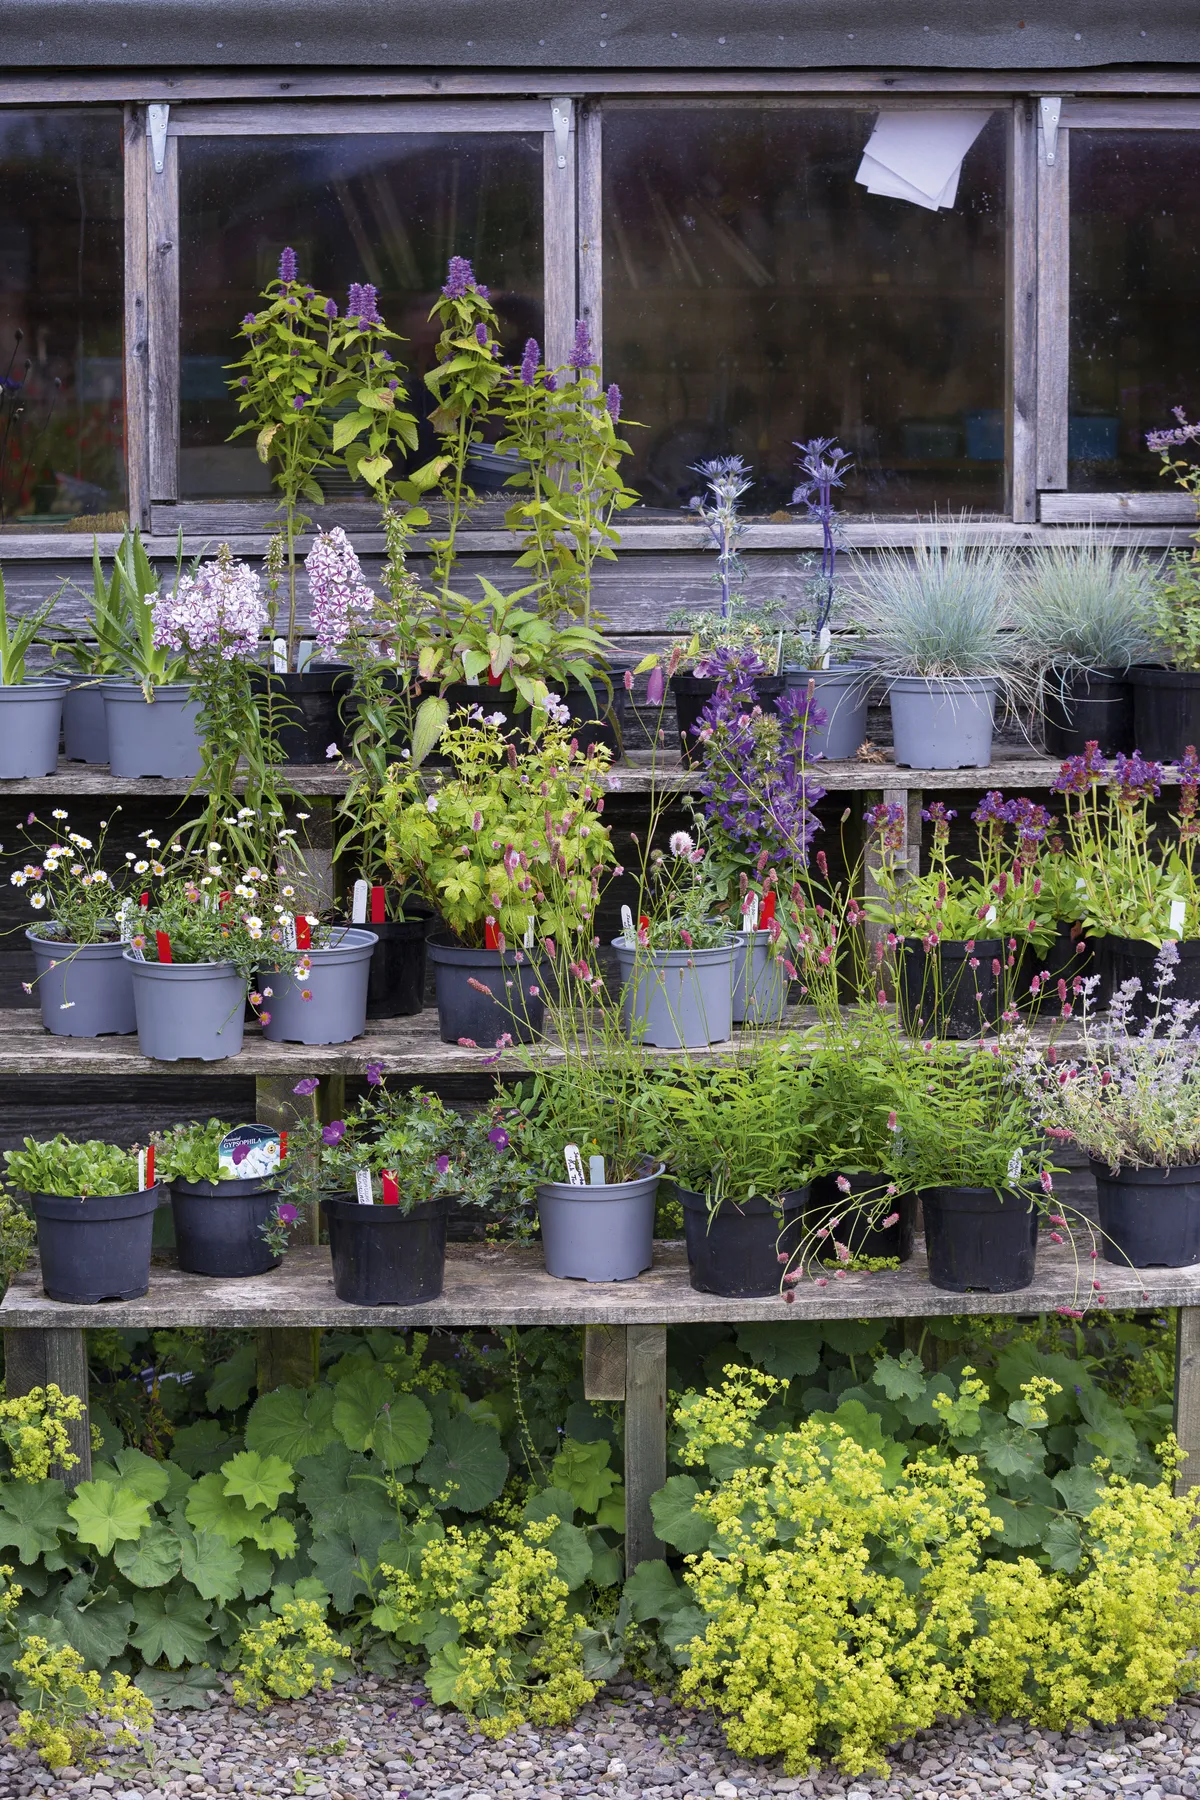 Benches in front of the potting shed display an eclectic mix of plants for sale, including Phlox paniculata ‘Bright Eyes’, Agastache ‘Blackadder’, Helictotrichon sempervirens, Erigeron karvinskianus and Prunella grandiflora.